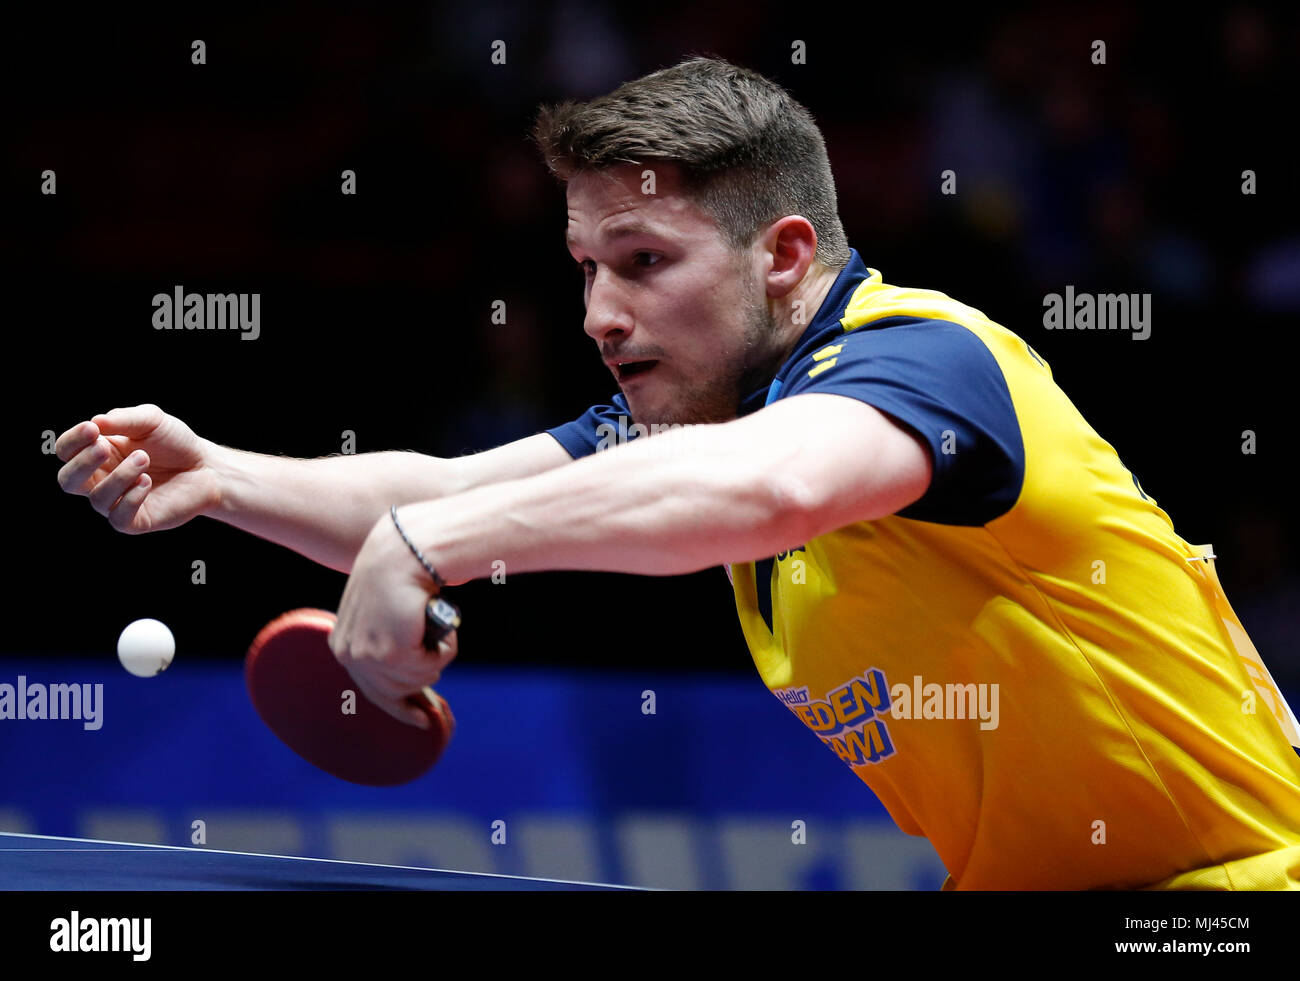 Halmstad, Sweden. 3rd May, 2018. Kristian Karlsson of Sweden competes  during the men's group round of 16 match against Chen Chien-An of Chinese  Taipei at the 2018 World Team Table Tennis Championships